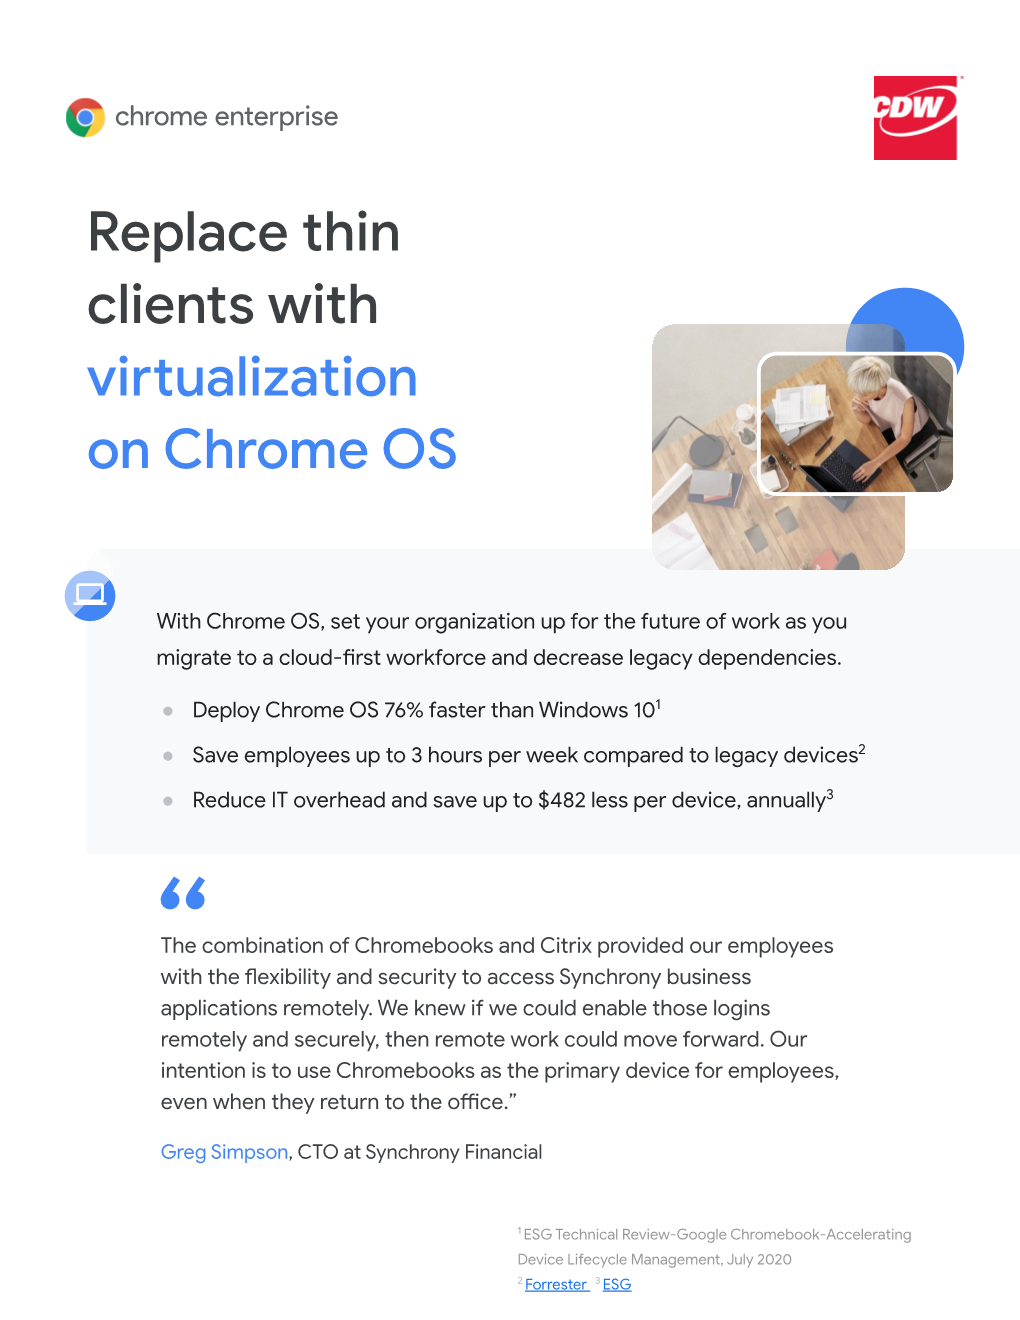 Replace Thin Clients with Virtualization on Chrome OS